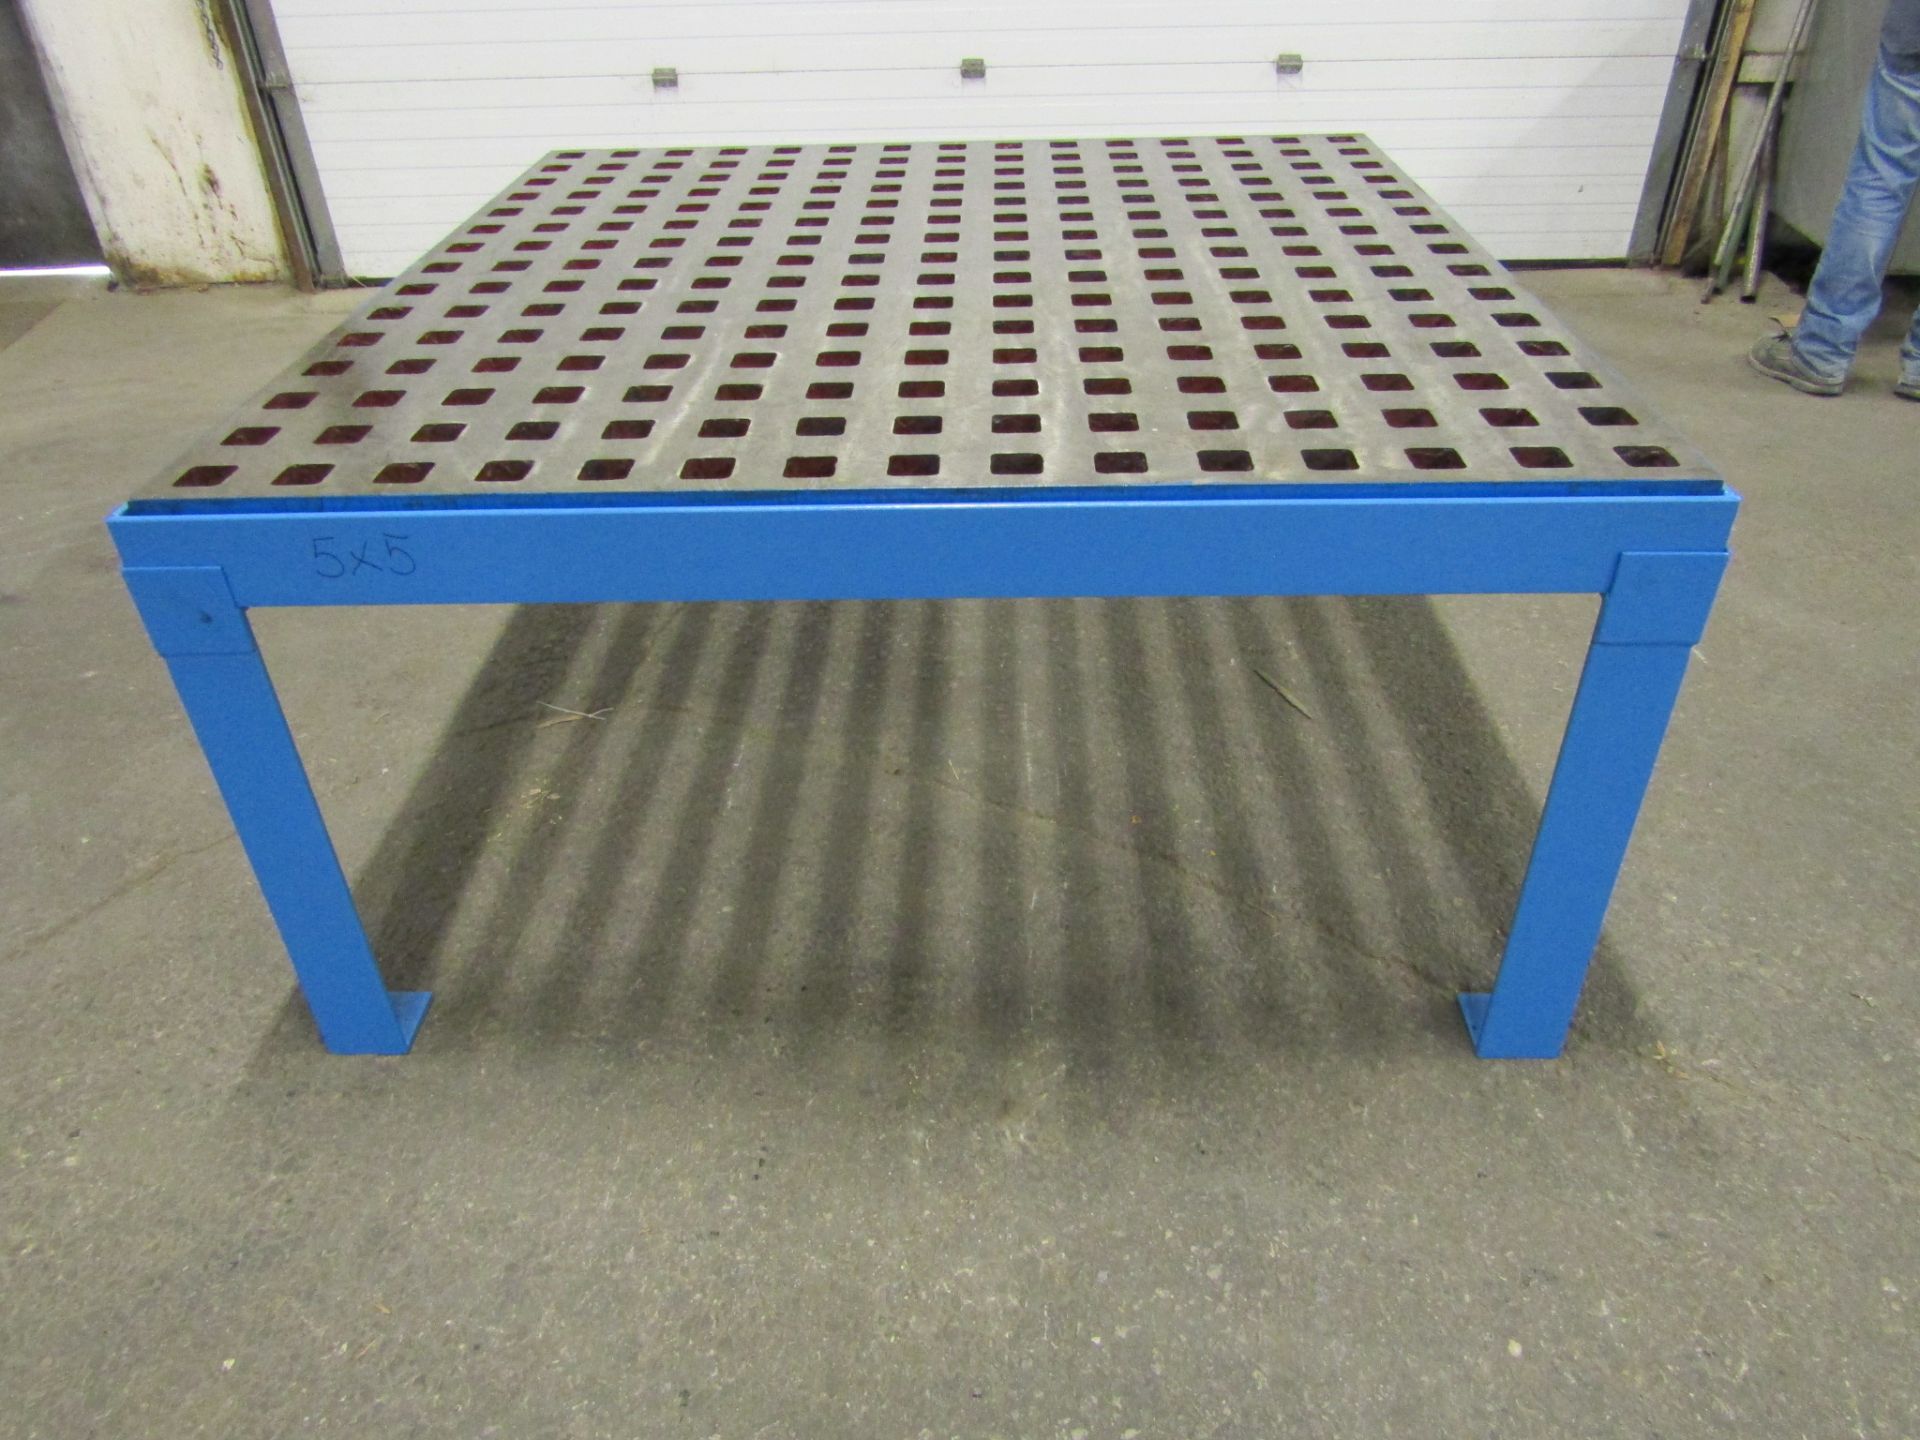 MINT Acorn Welding Table - 5' x 5' / 60" x 60" with table stand